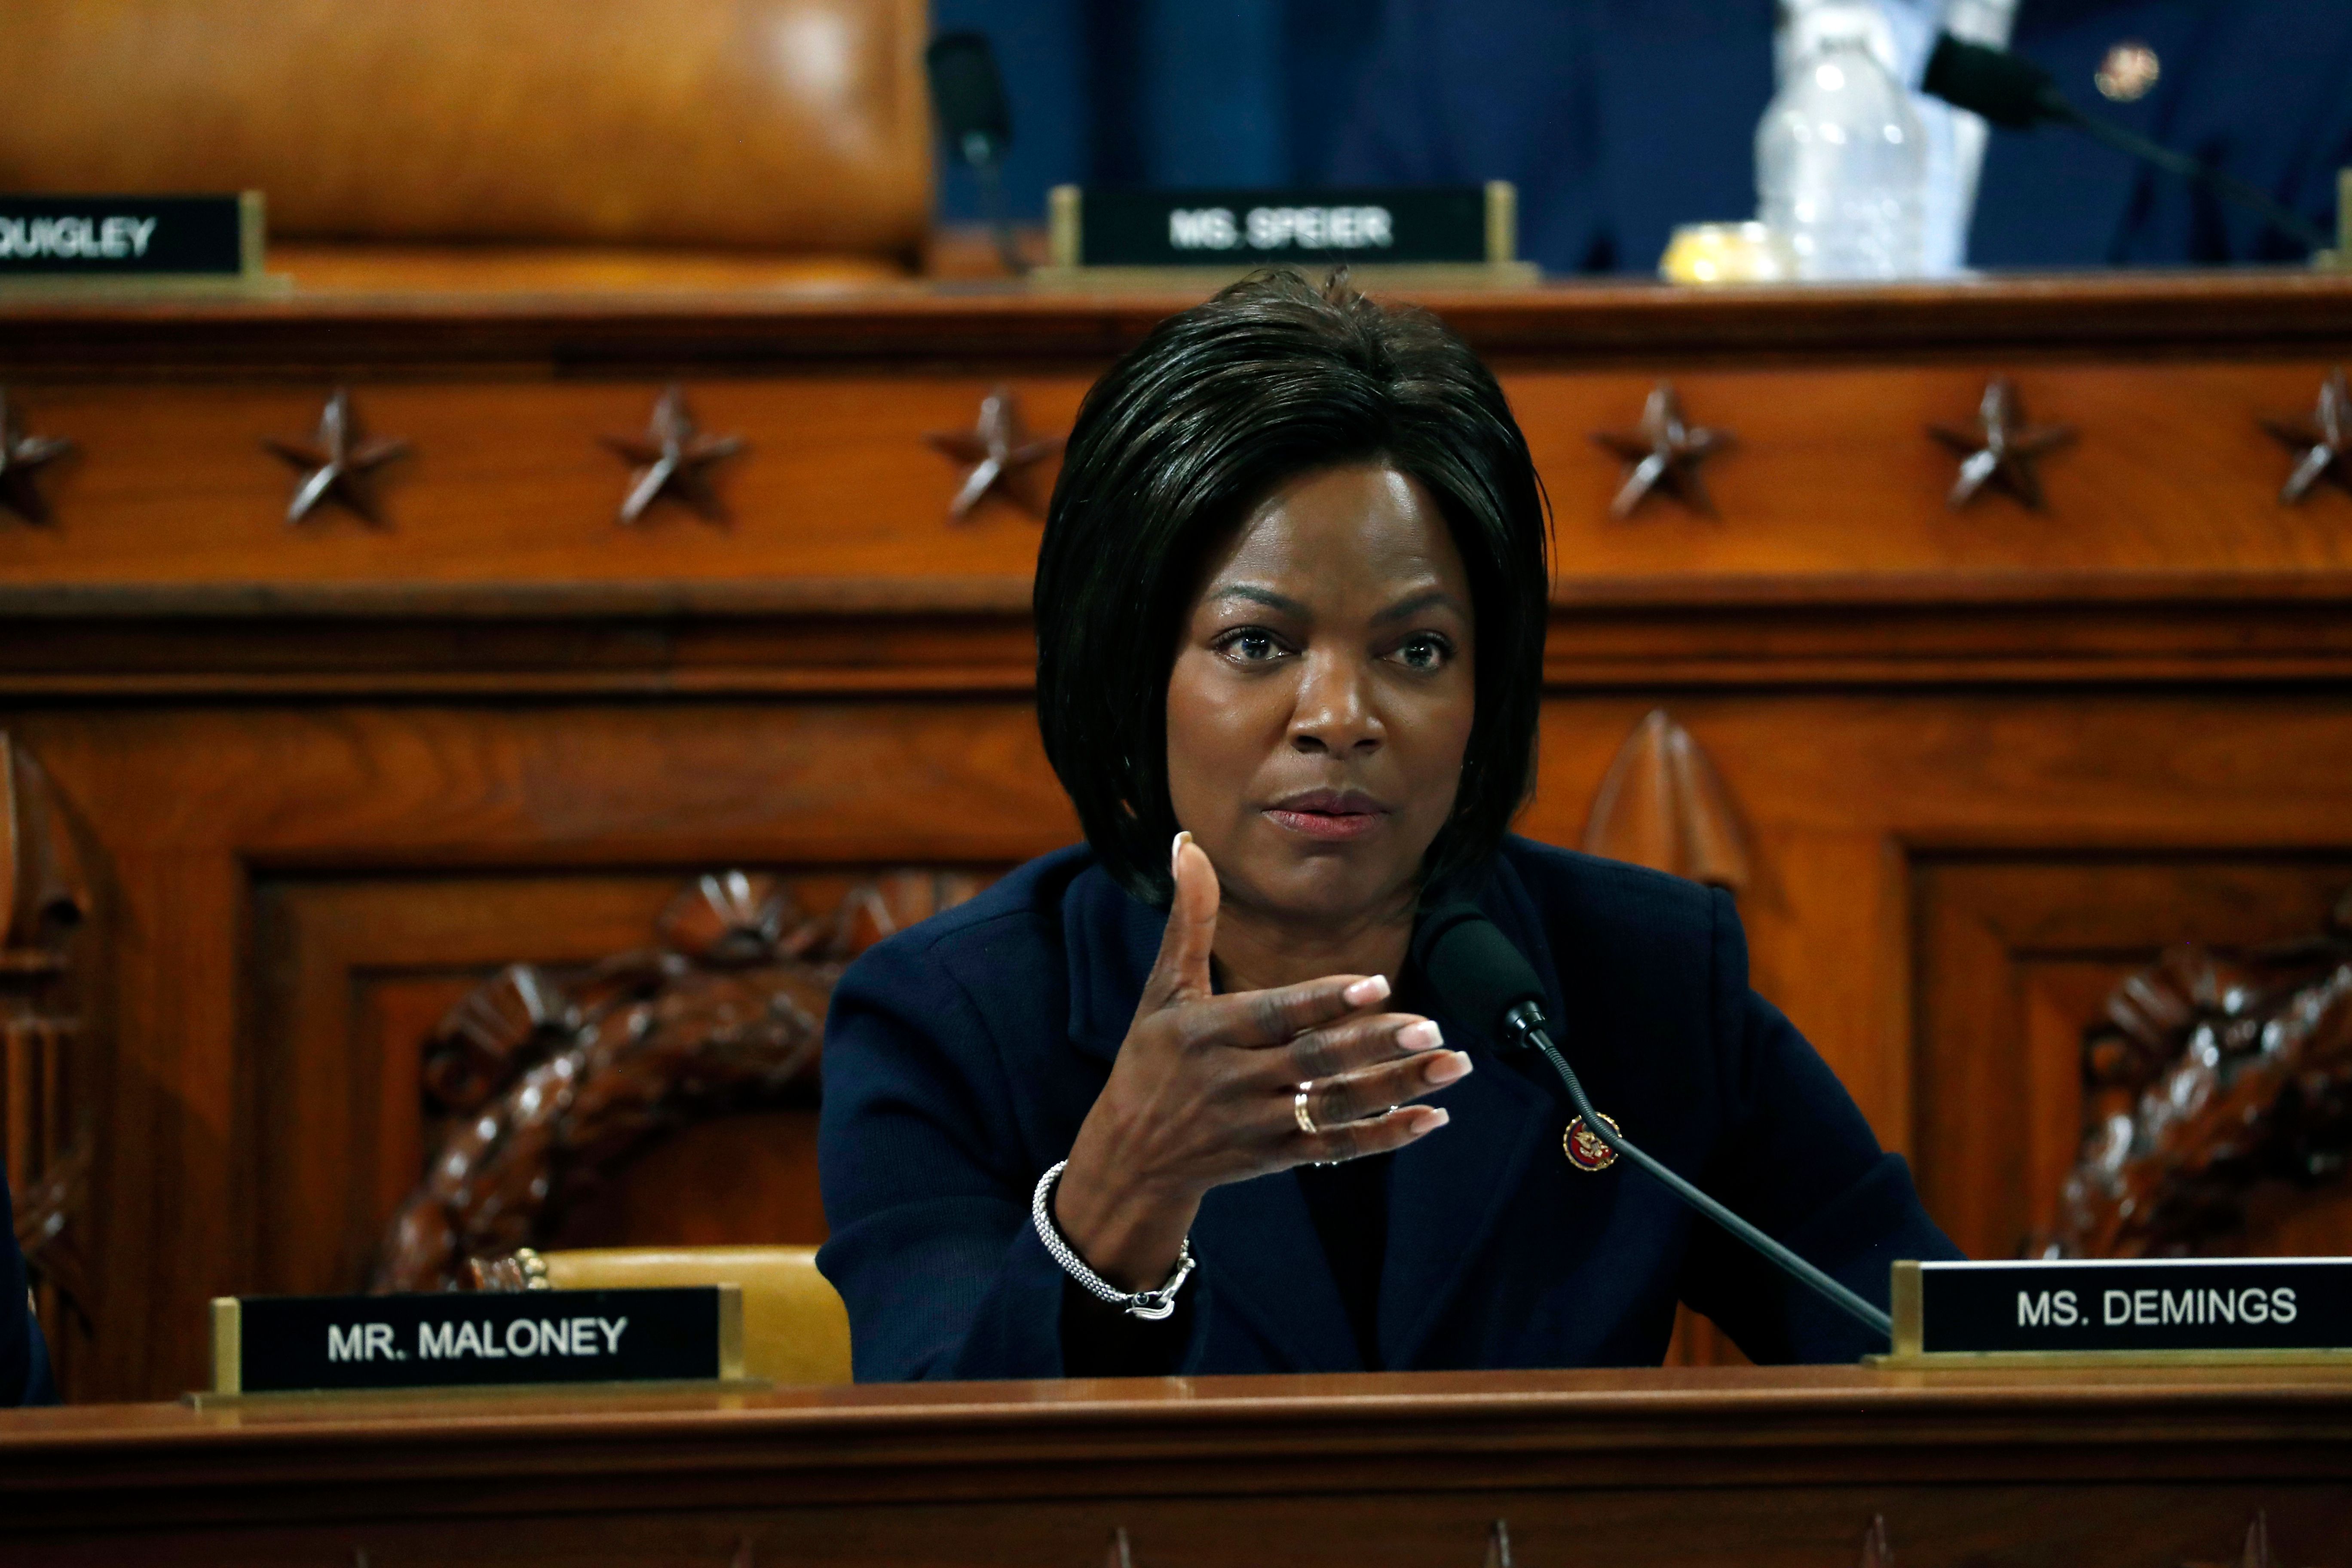 Val Demings 5 Fast Facts You Need to Know